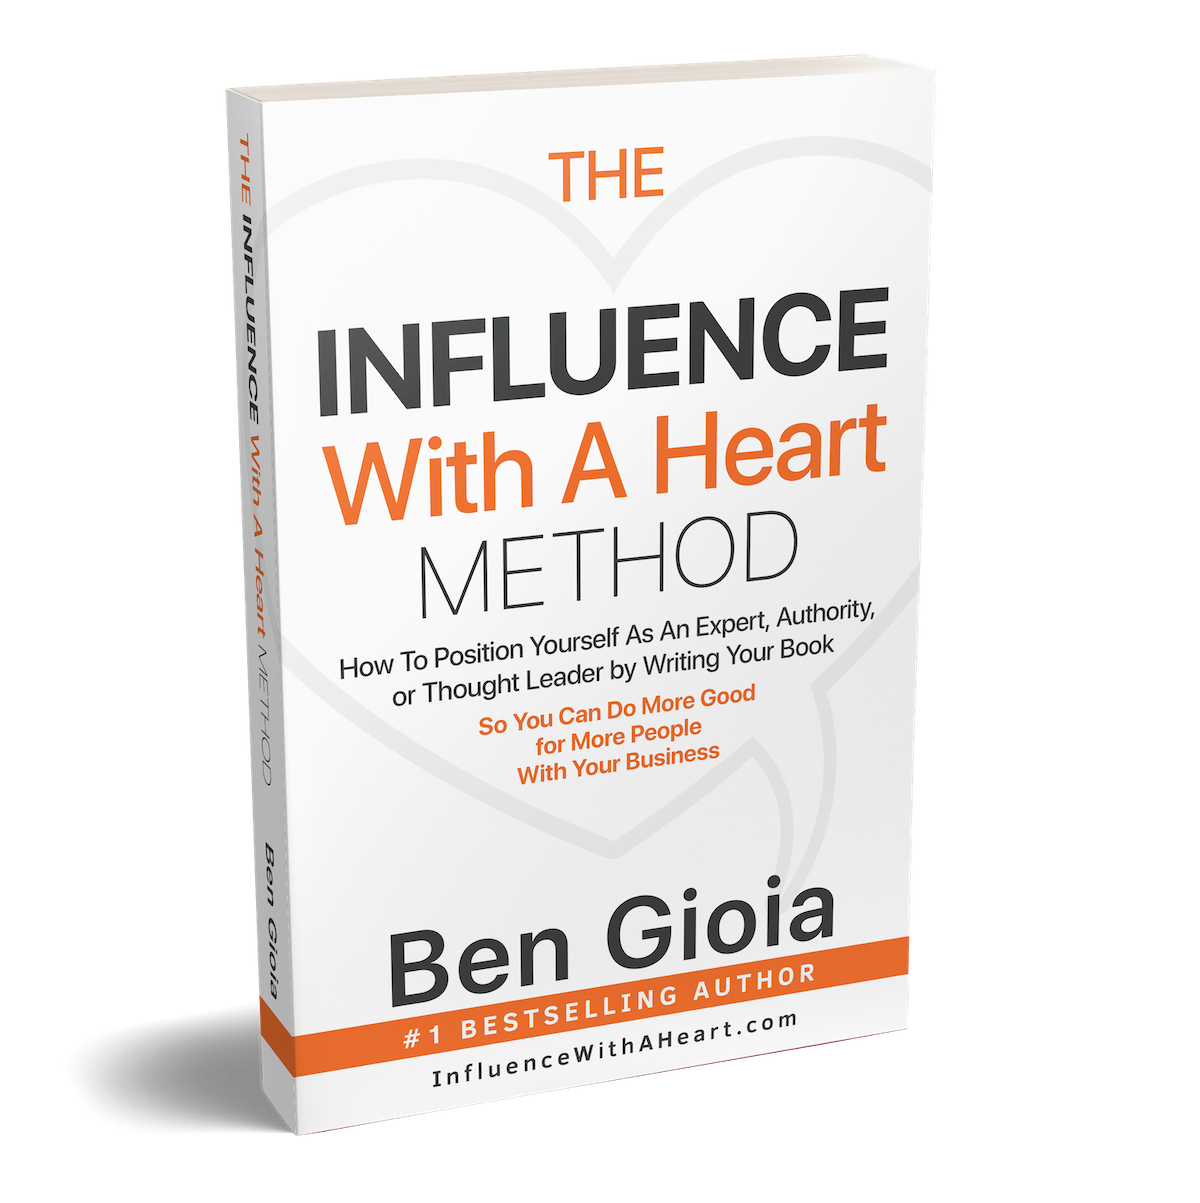 Influence with a Heart Method book